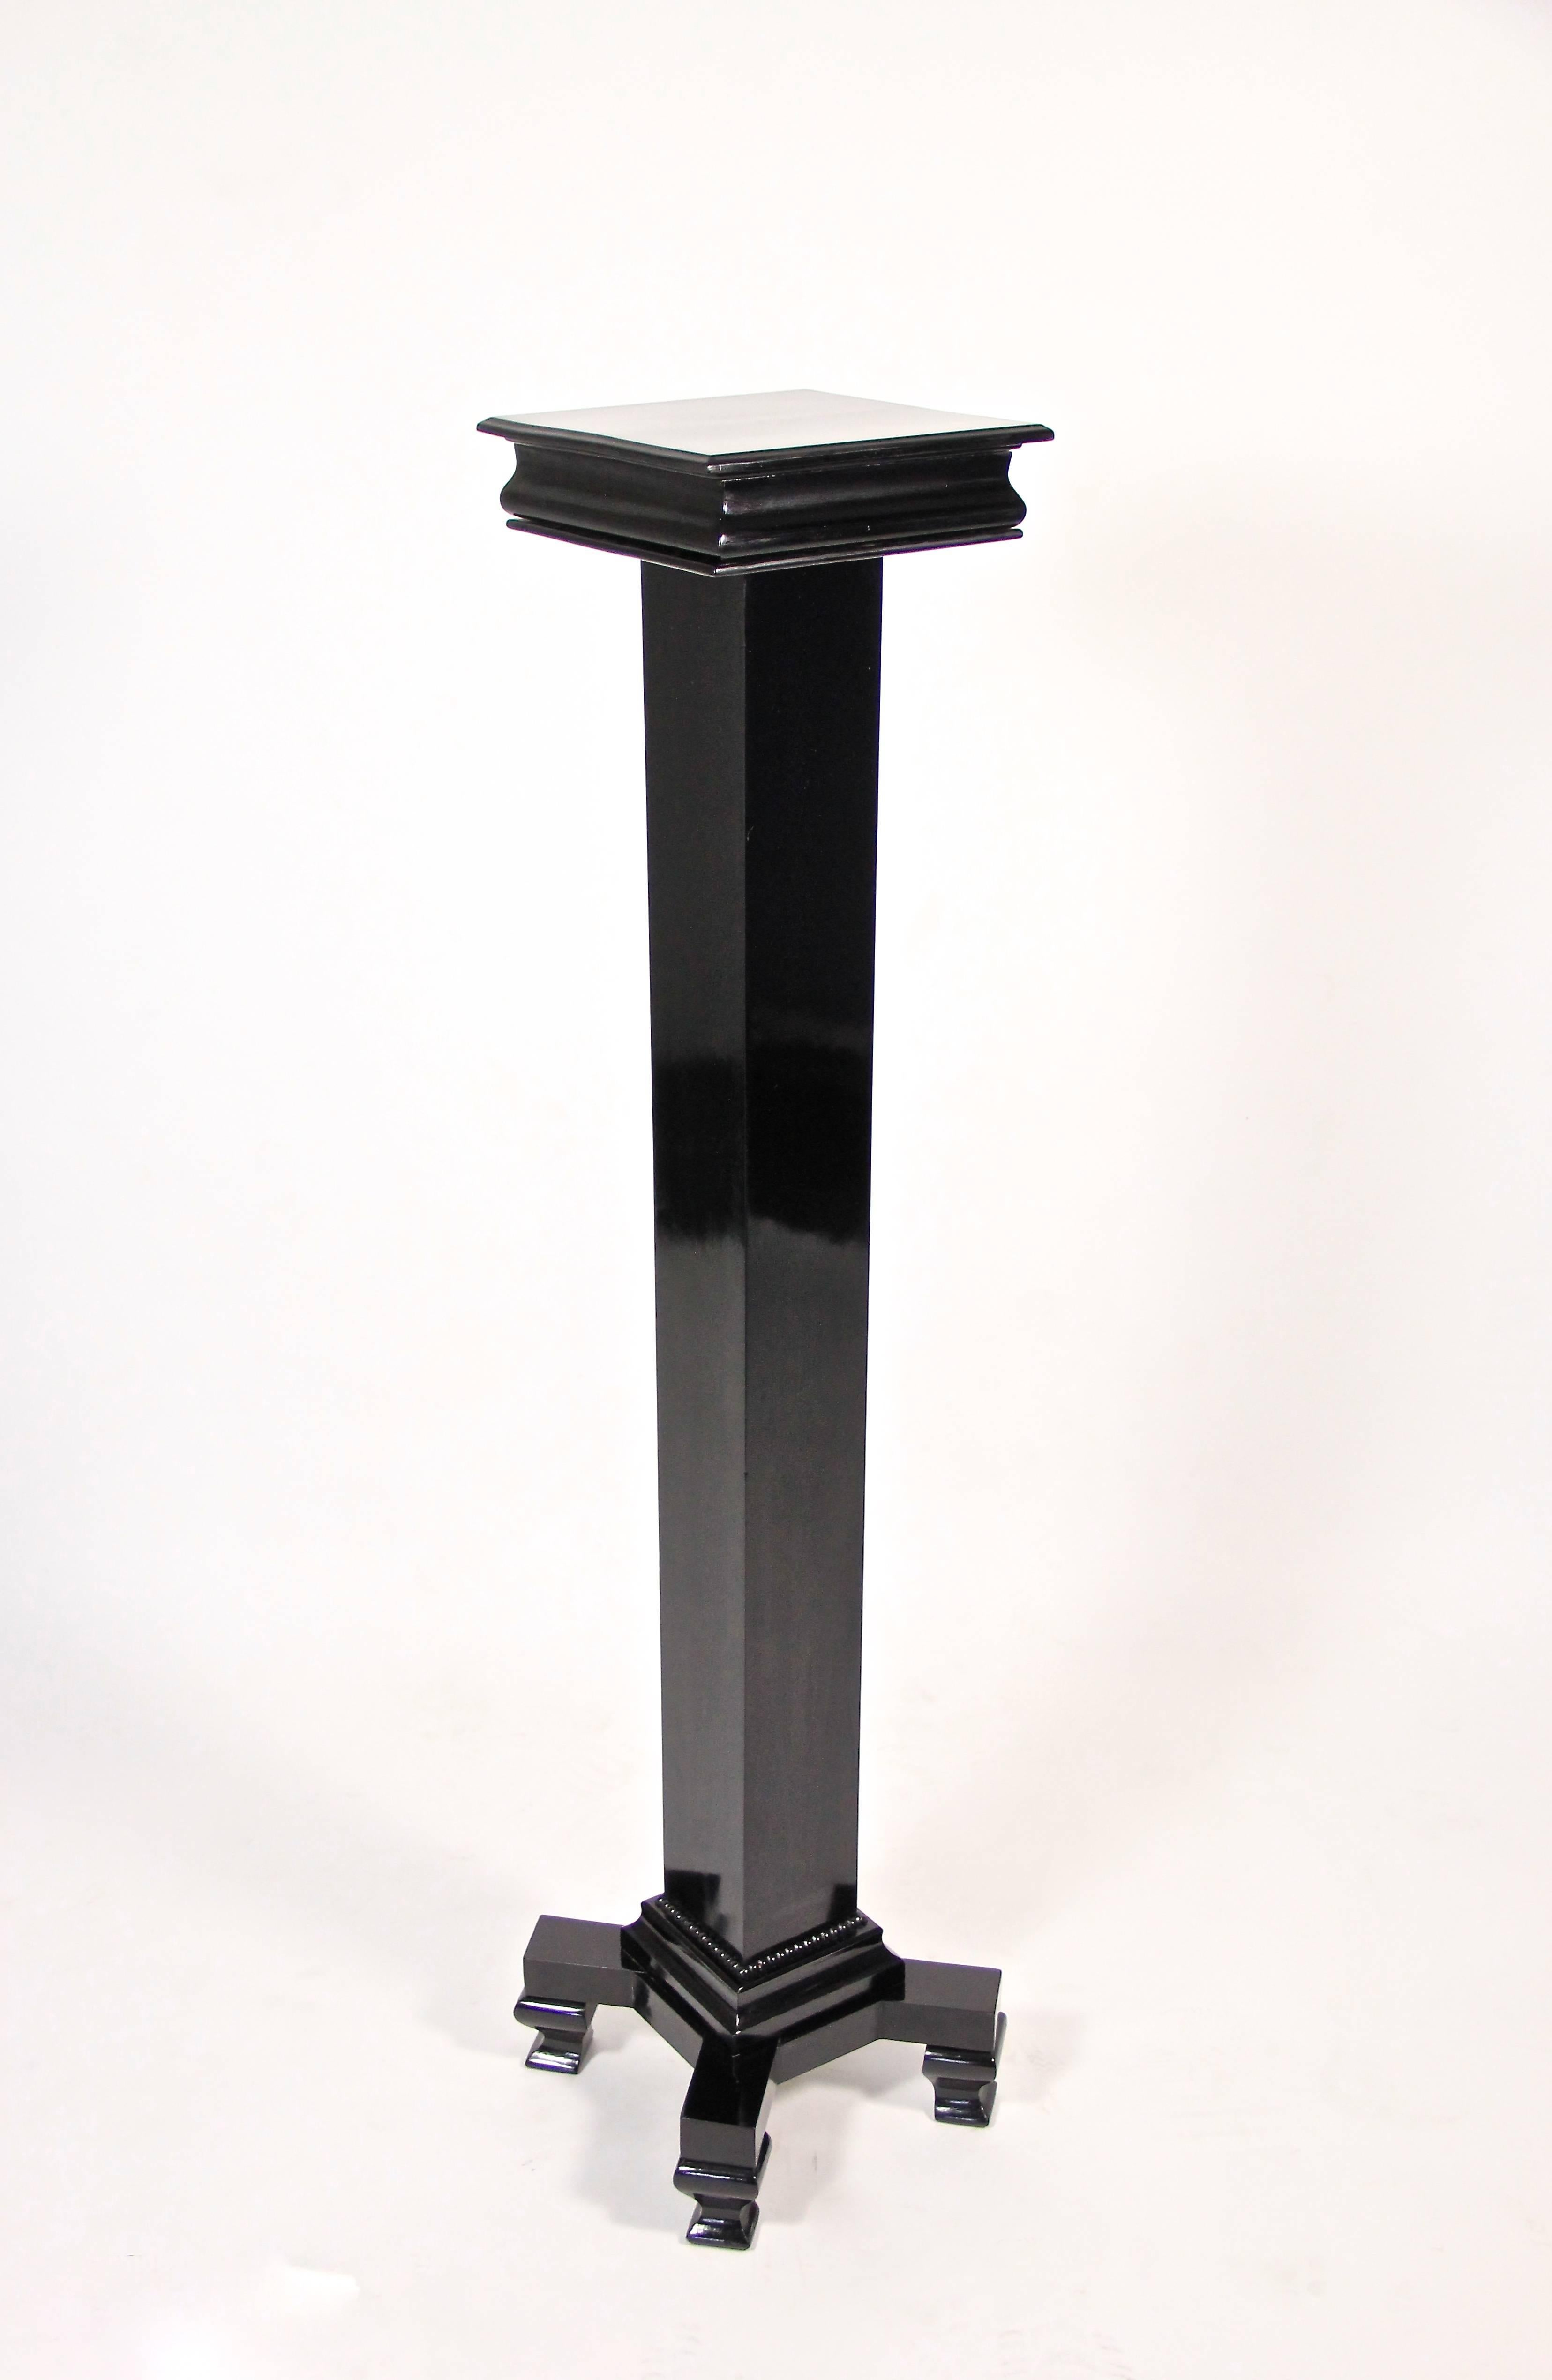 This stunning Art Deco pedestal from circa 1920 was made in Austria of fine fruitwood. Ebonized and finished with a fantastic hand-polished shellac finish, this Pedestal impresses with its straight architectural design. Reduced to clear lines,